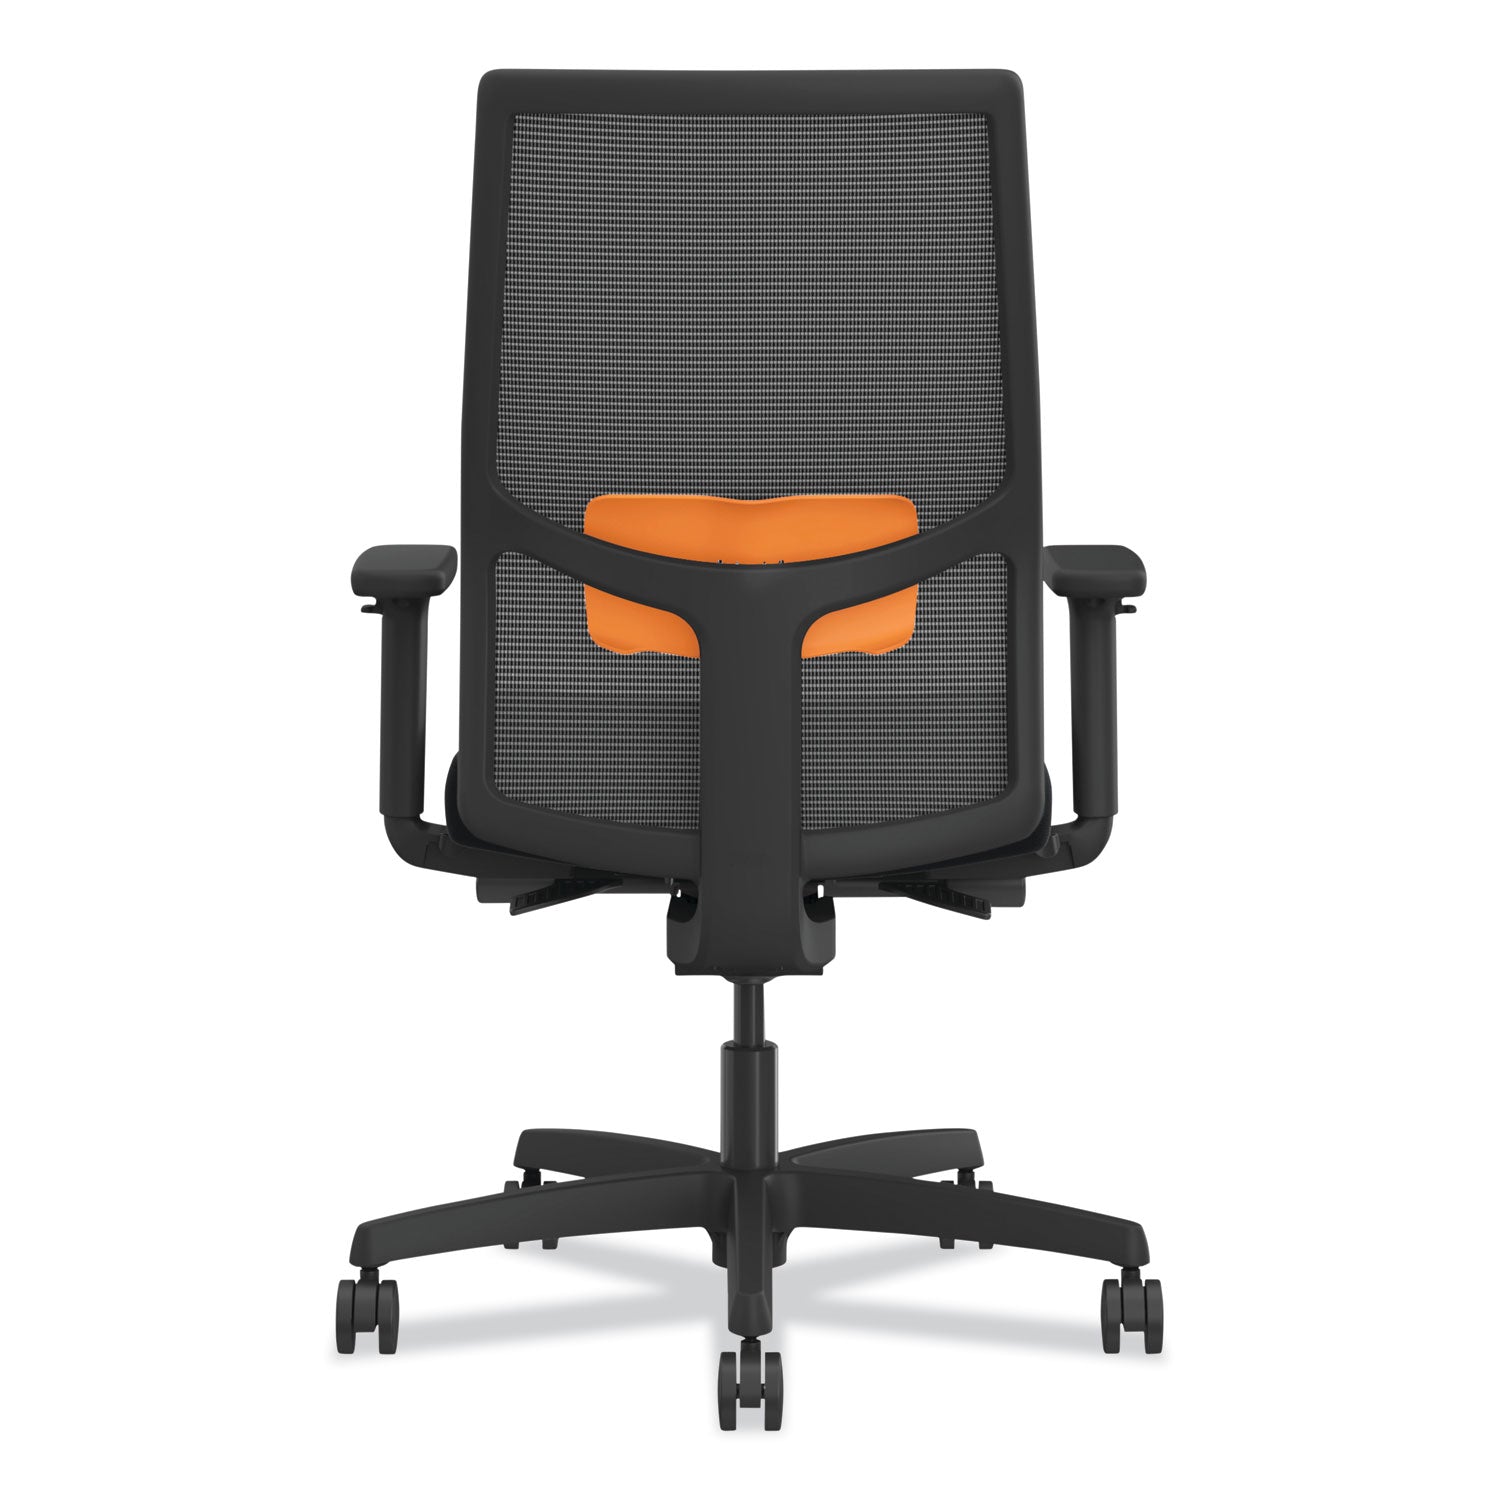 ignition-20-4-way-stretch-mid-back-mesh-task-chair-orange-adjustable-lumbar-support-black-ships-in-7-10-business-days_honi2mm2amc10mt - 2